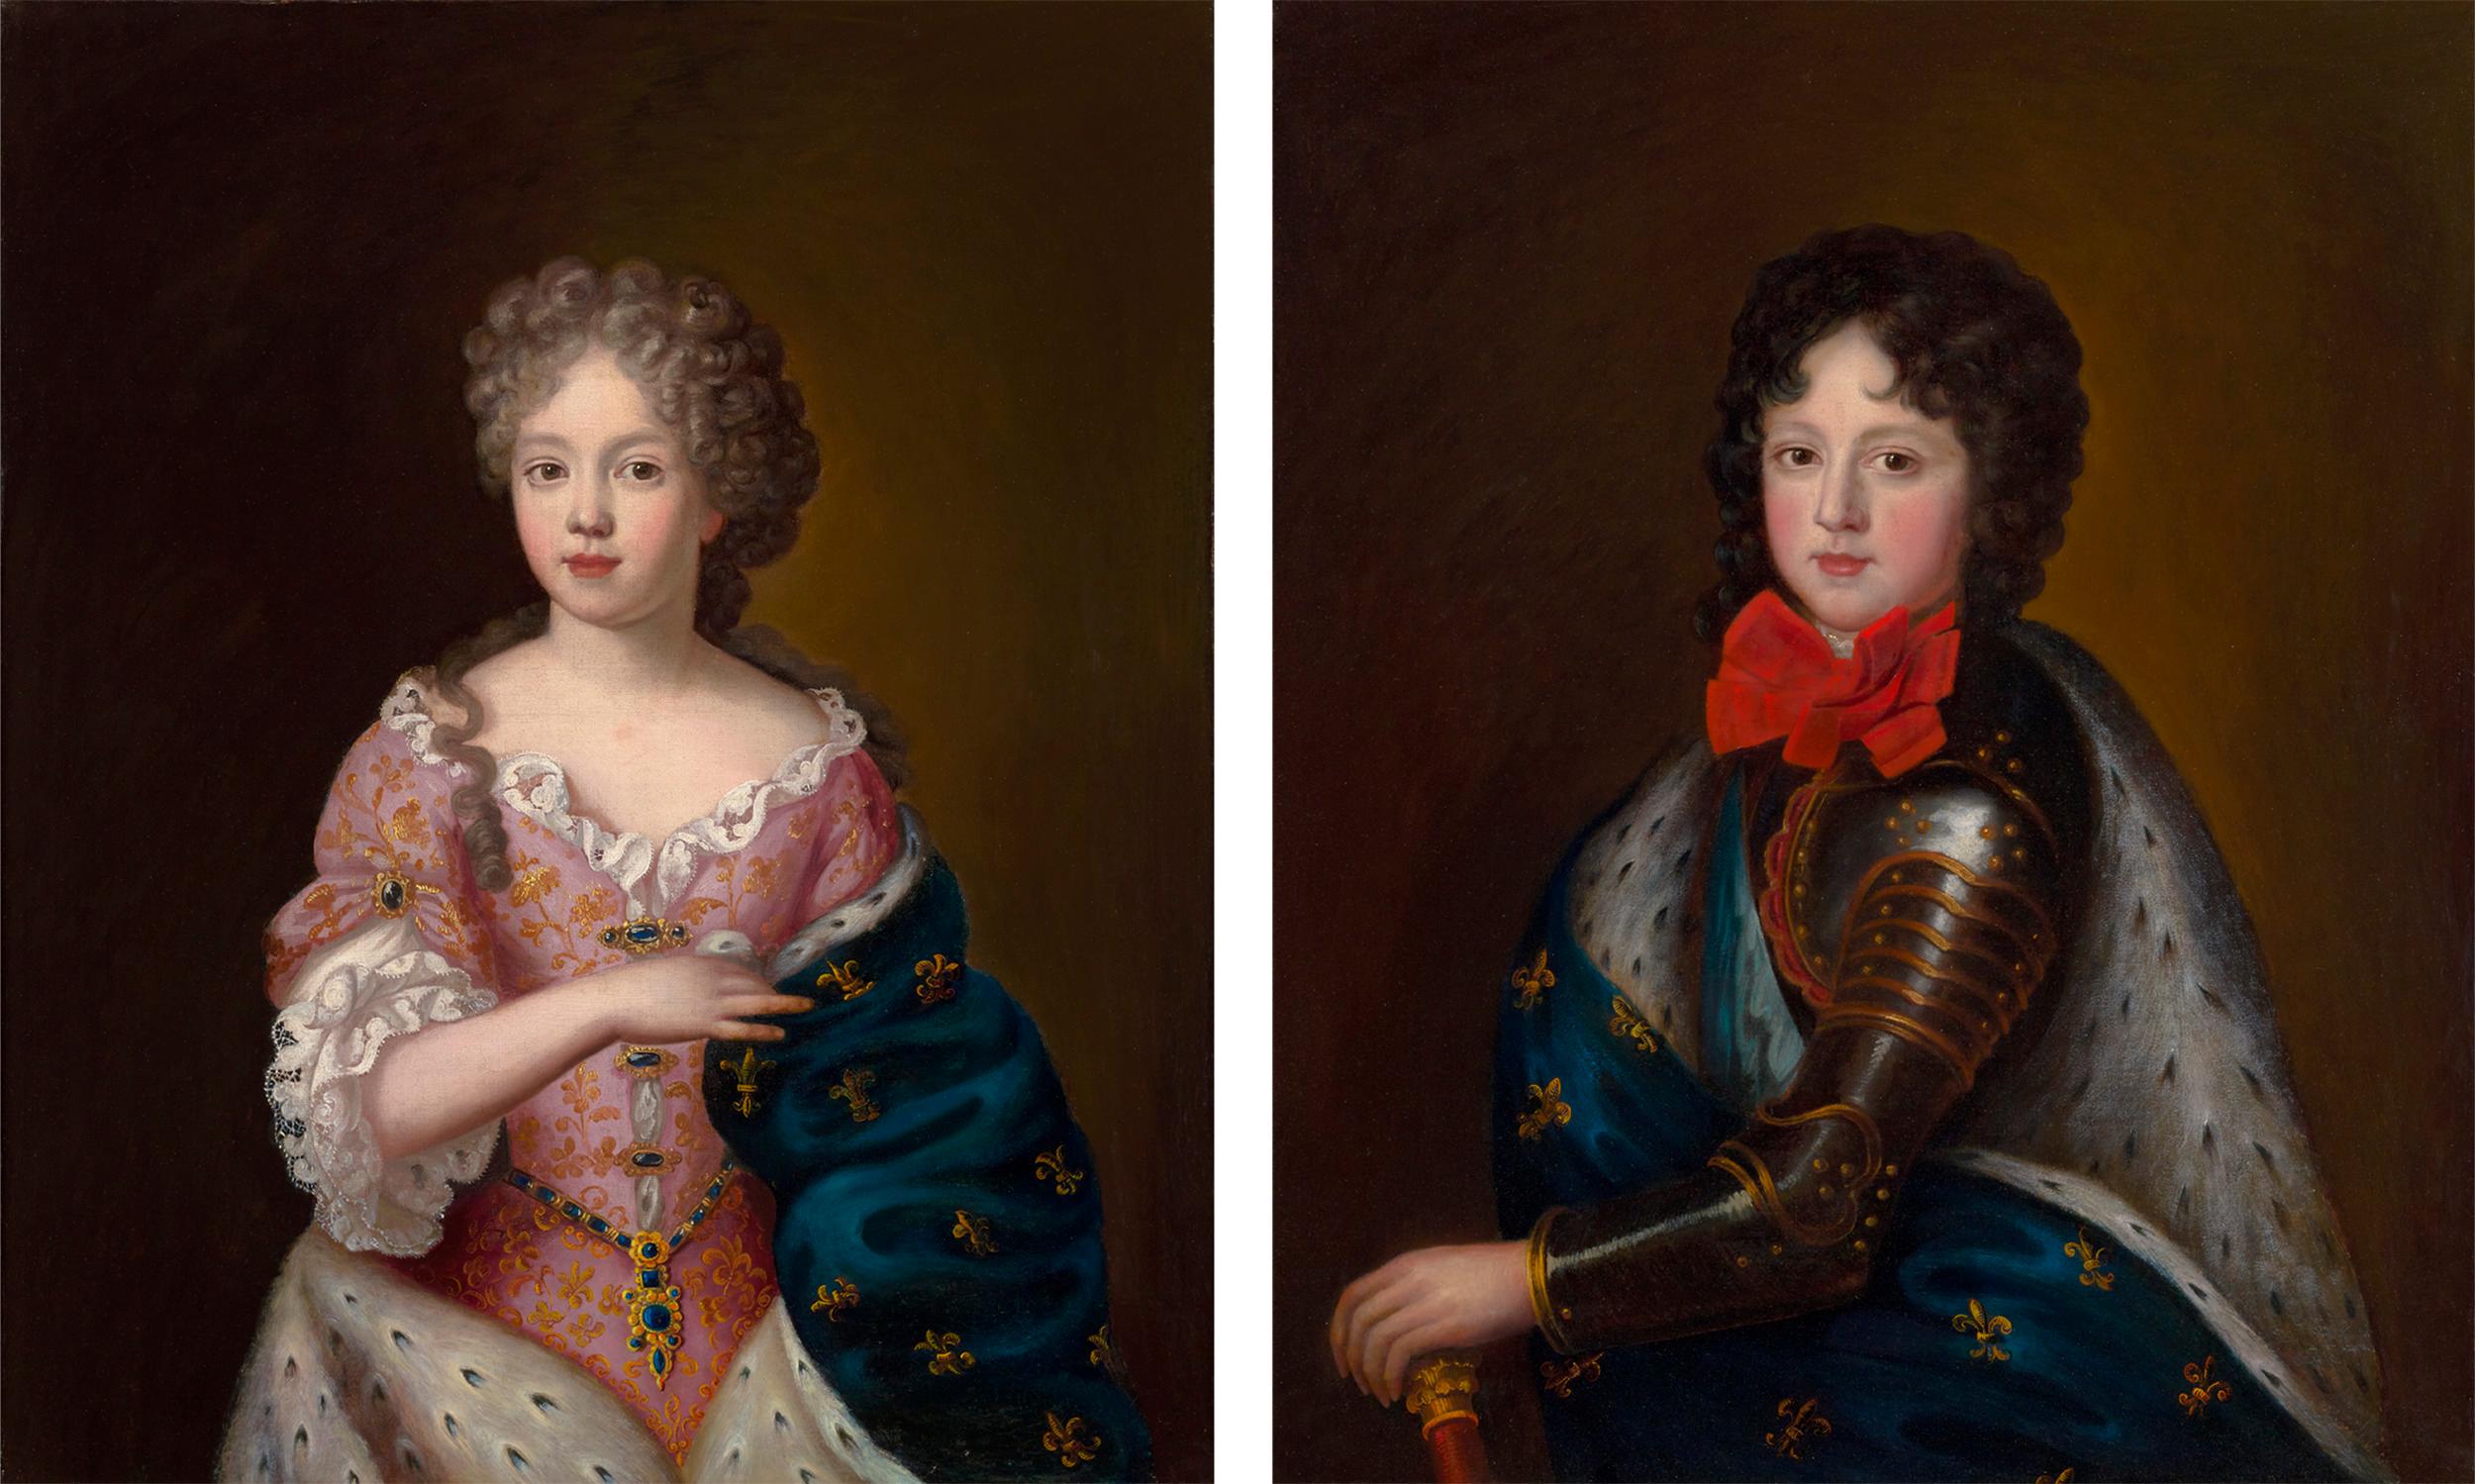 Pair of Royal Portraits of the Duke and Duchess of Burgundy